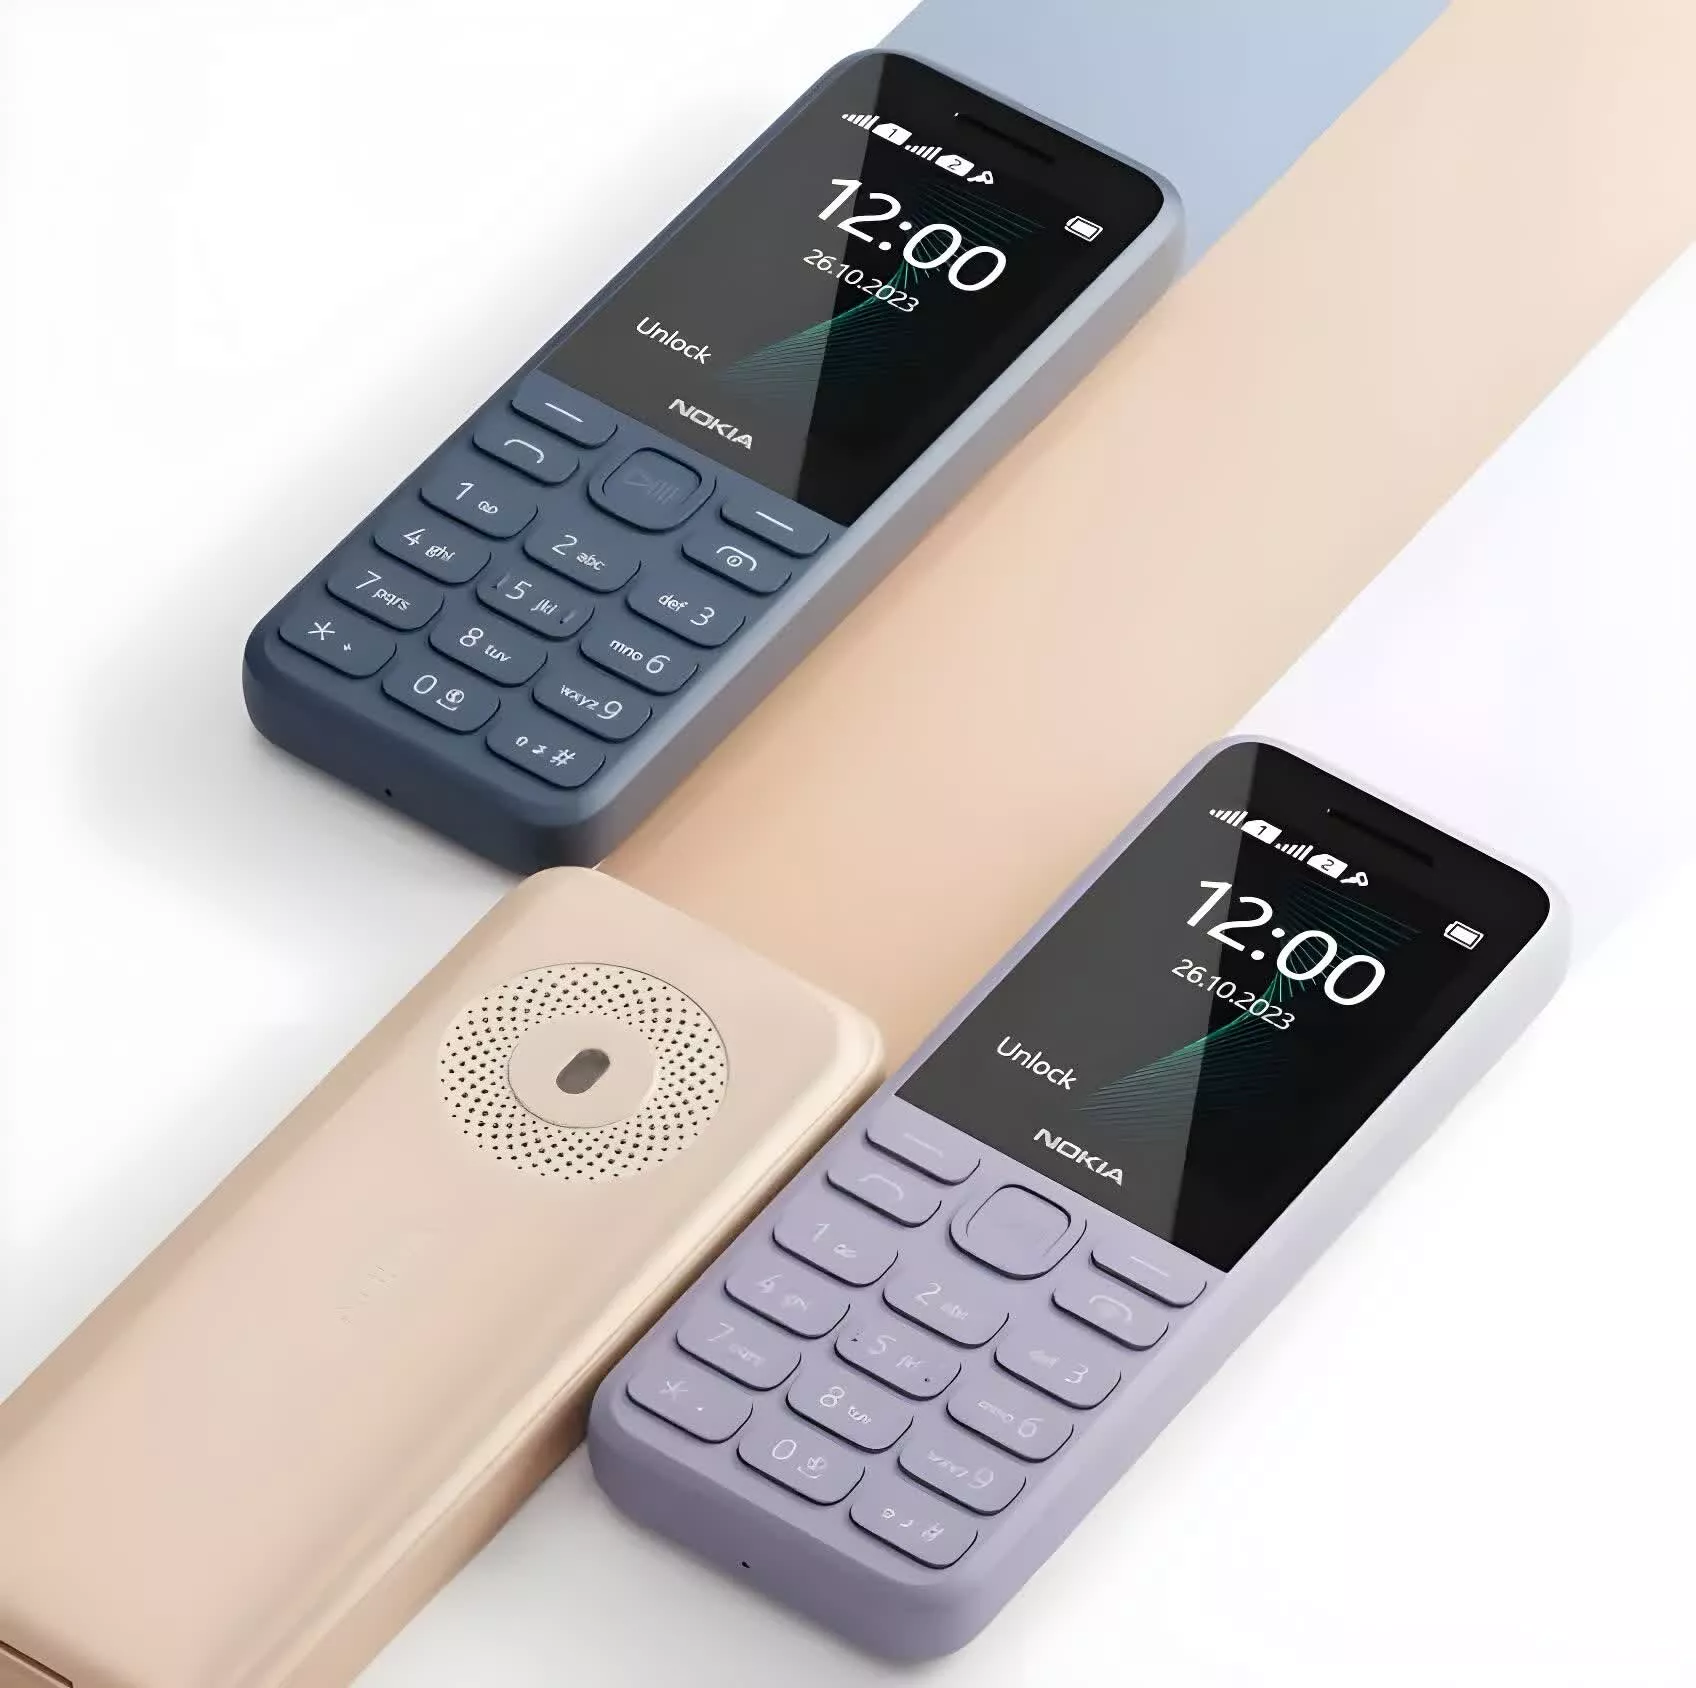 Nokia resurrects the past with its latest feature phones